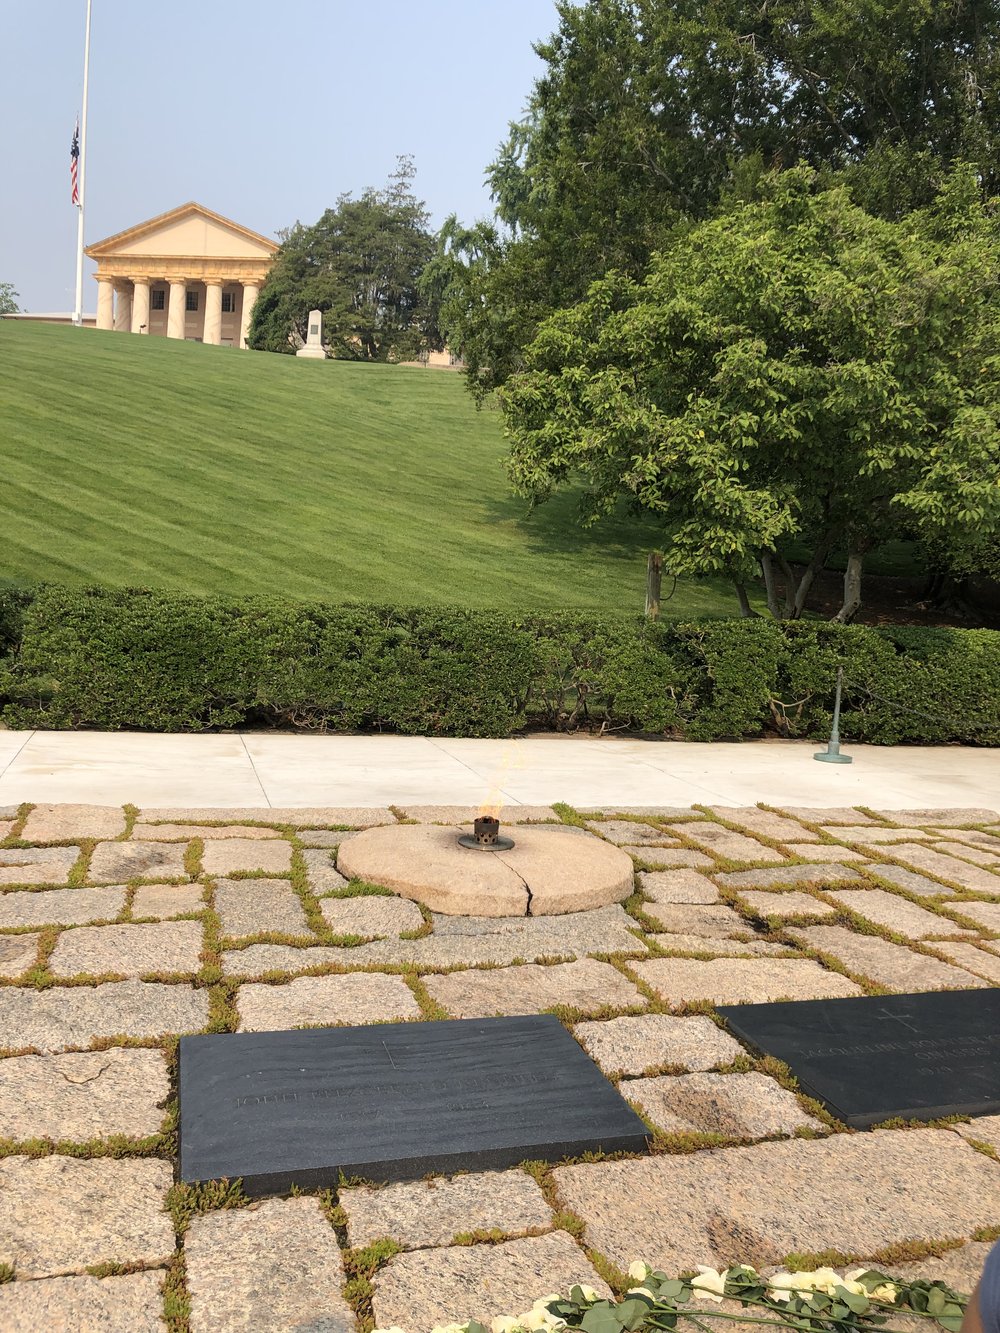 The eternal flame, John F. Kennedy's grave.